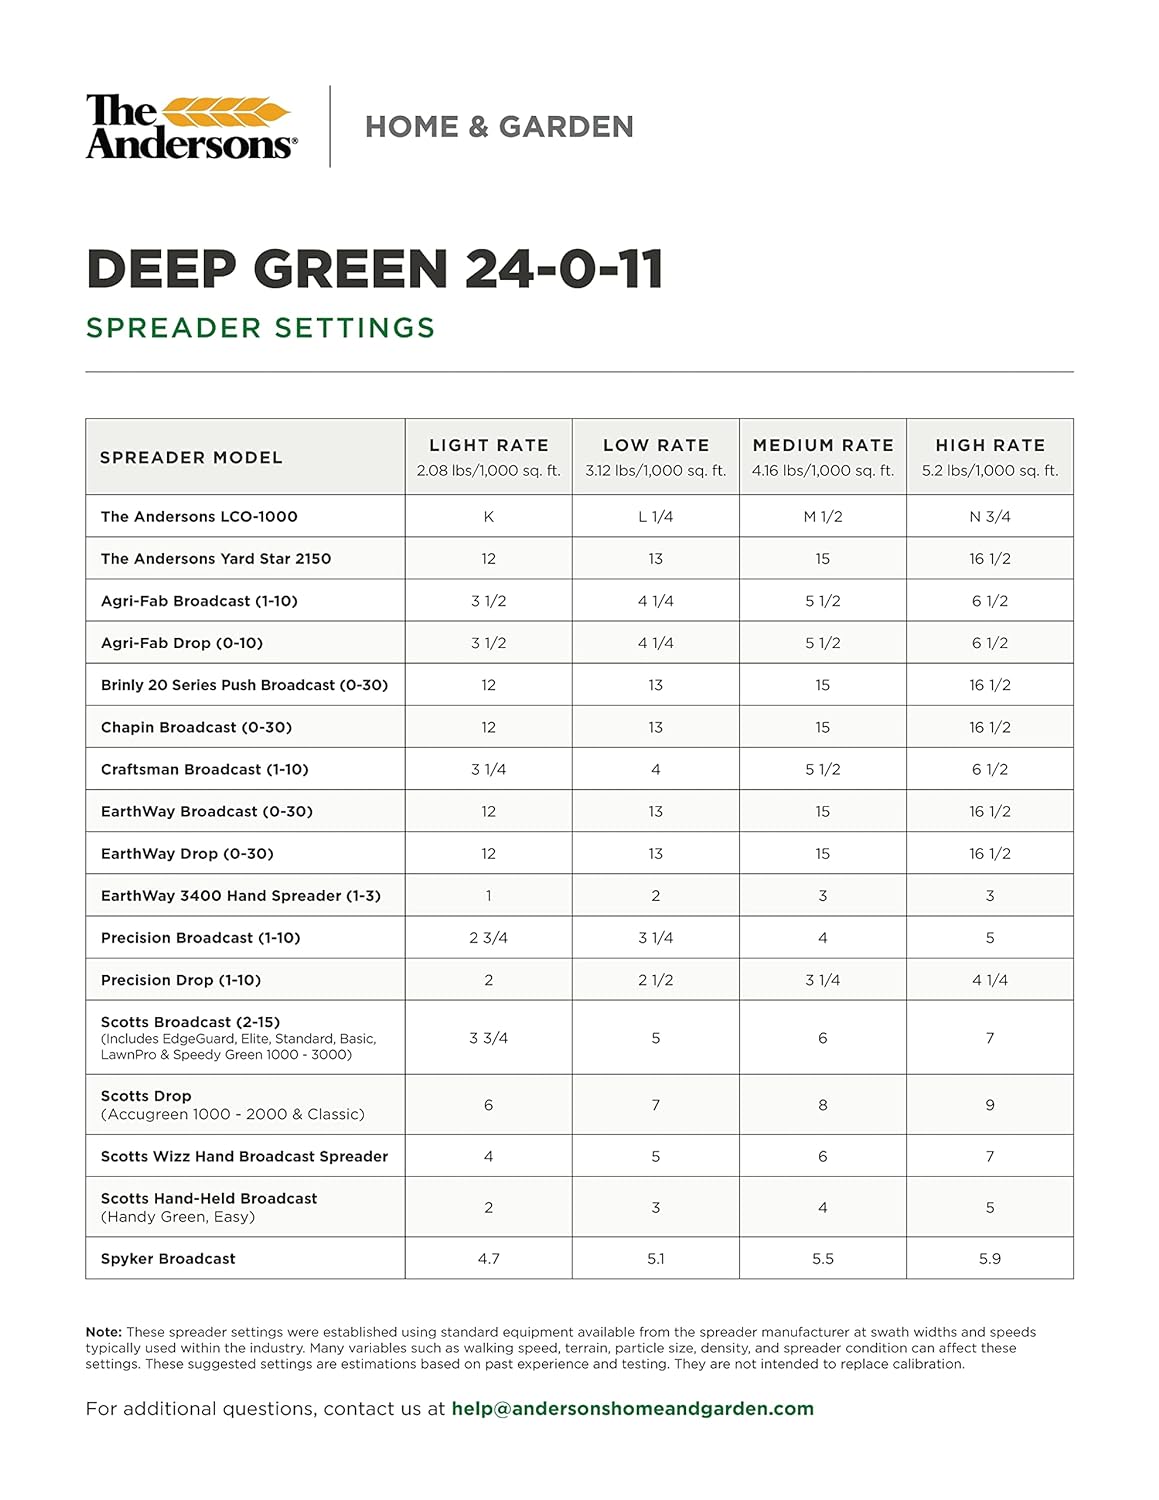 The Andersons Professional 24-0-11 2% Iron Deep Green Fertilizer: A Review